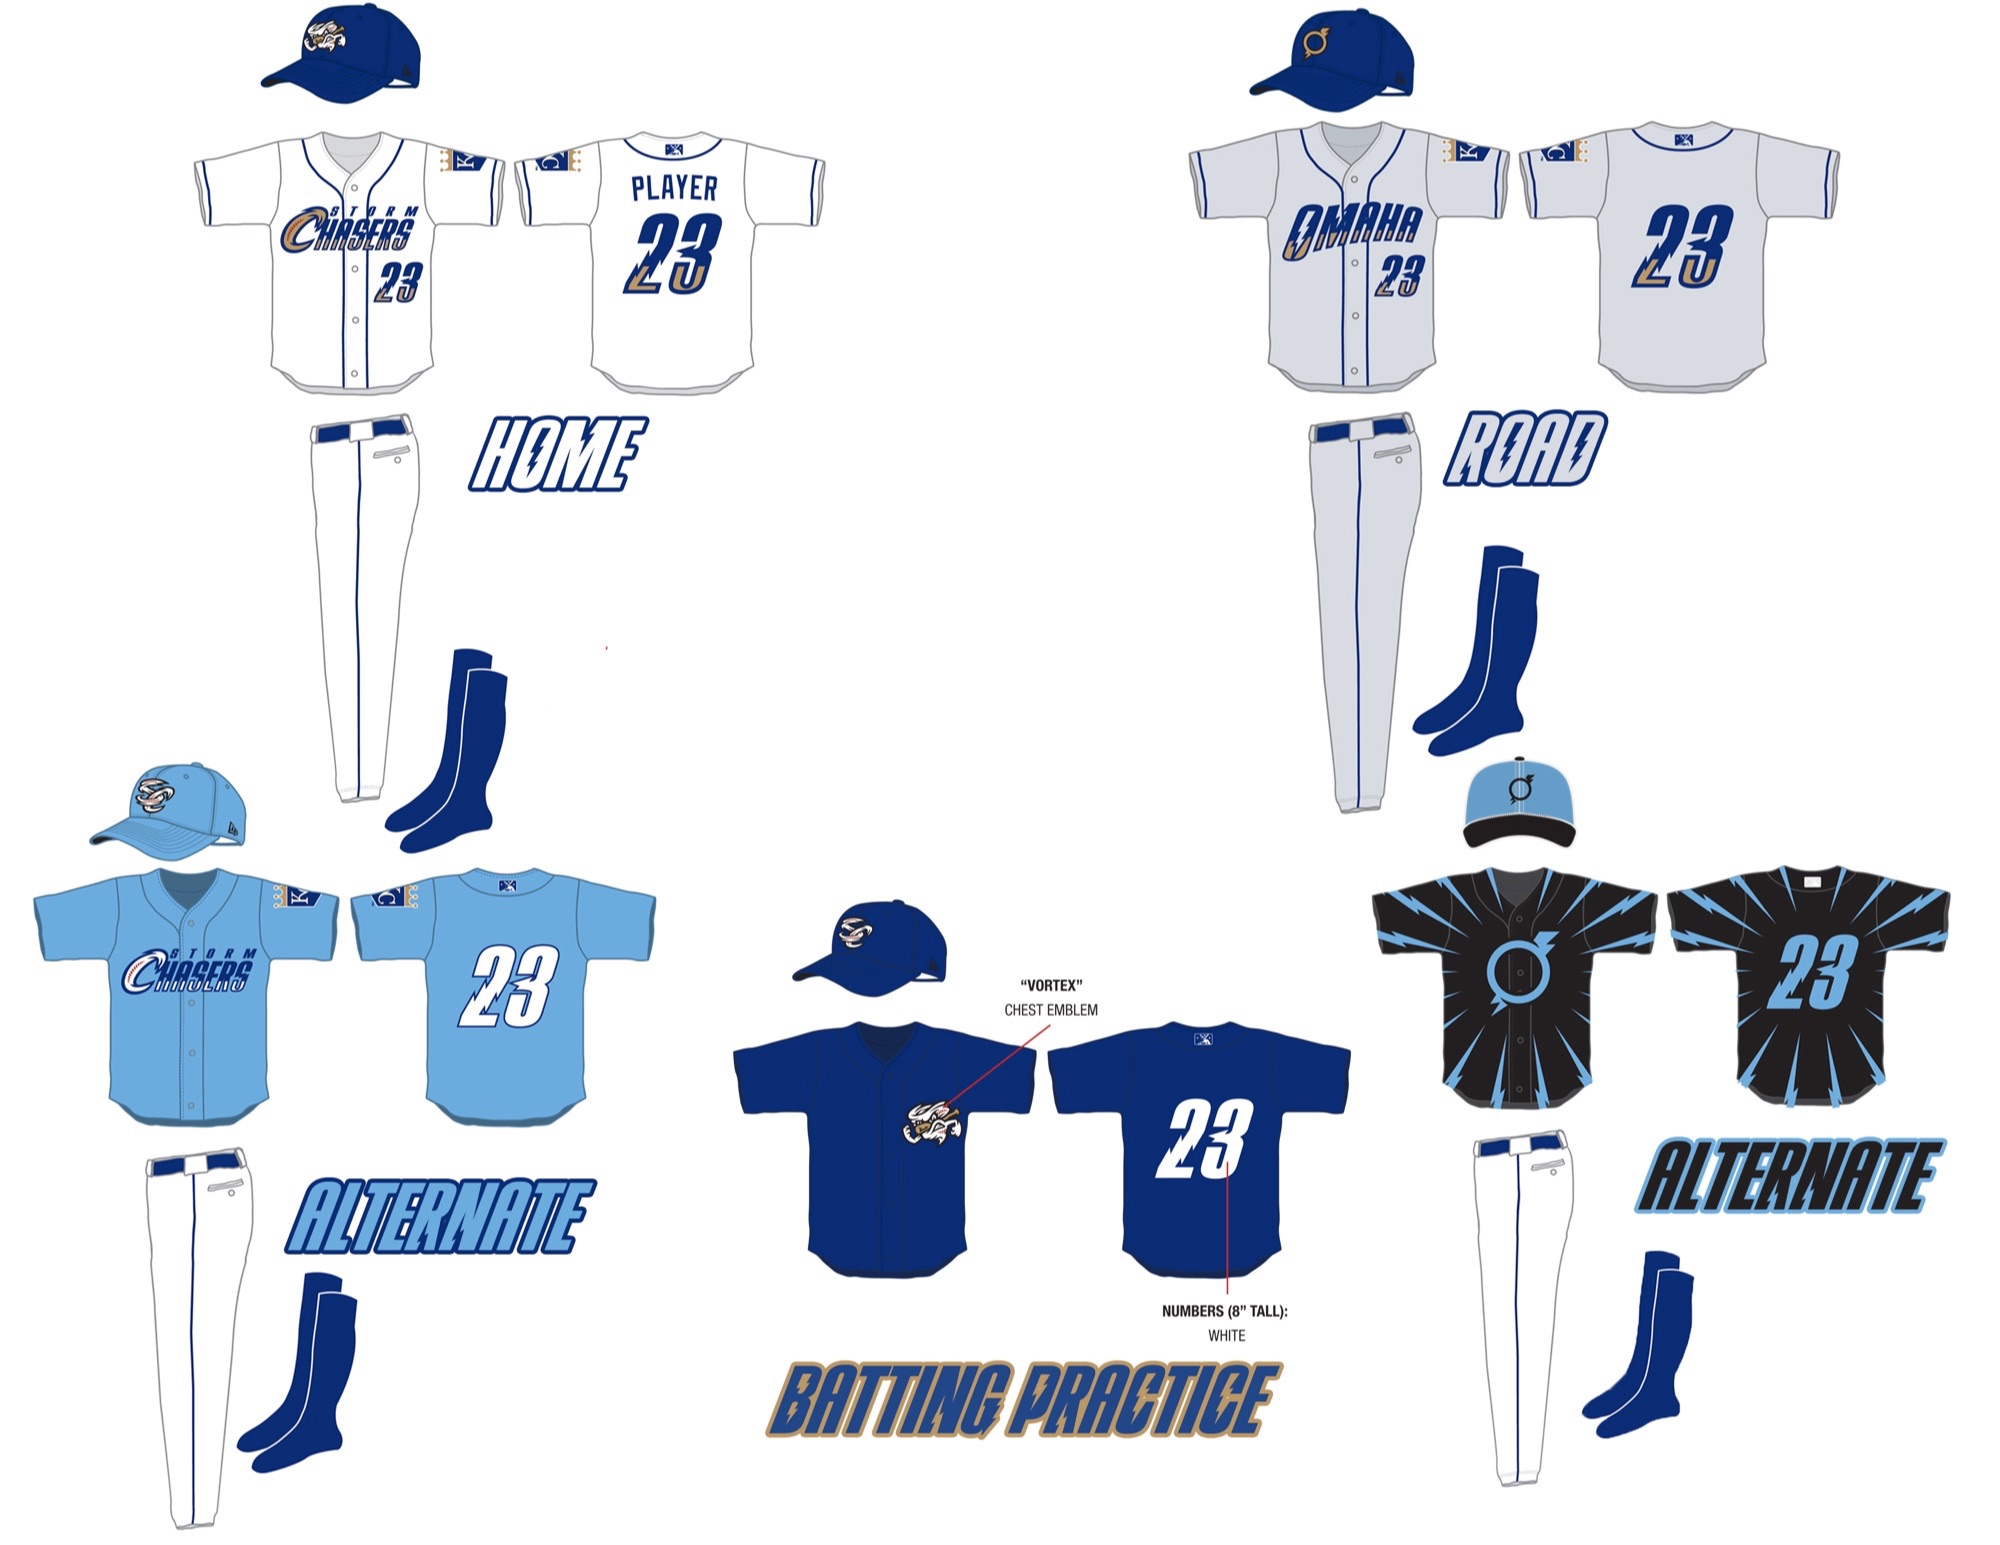 Omaha Storm Chasers 2016 road uniforms